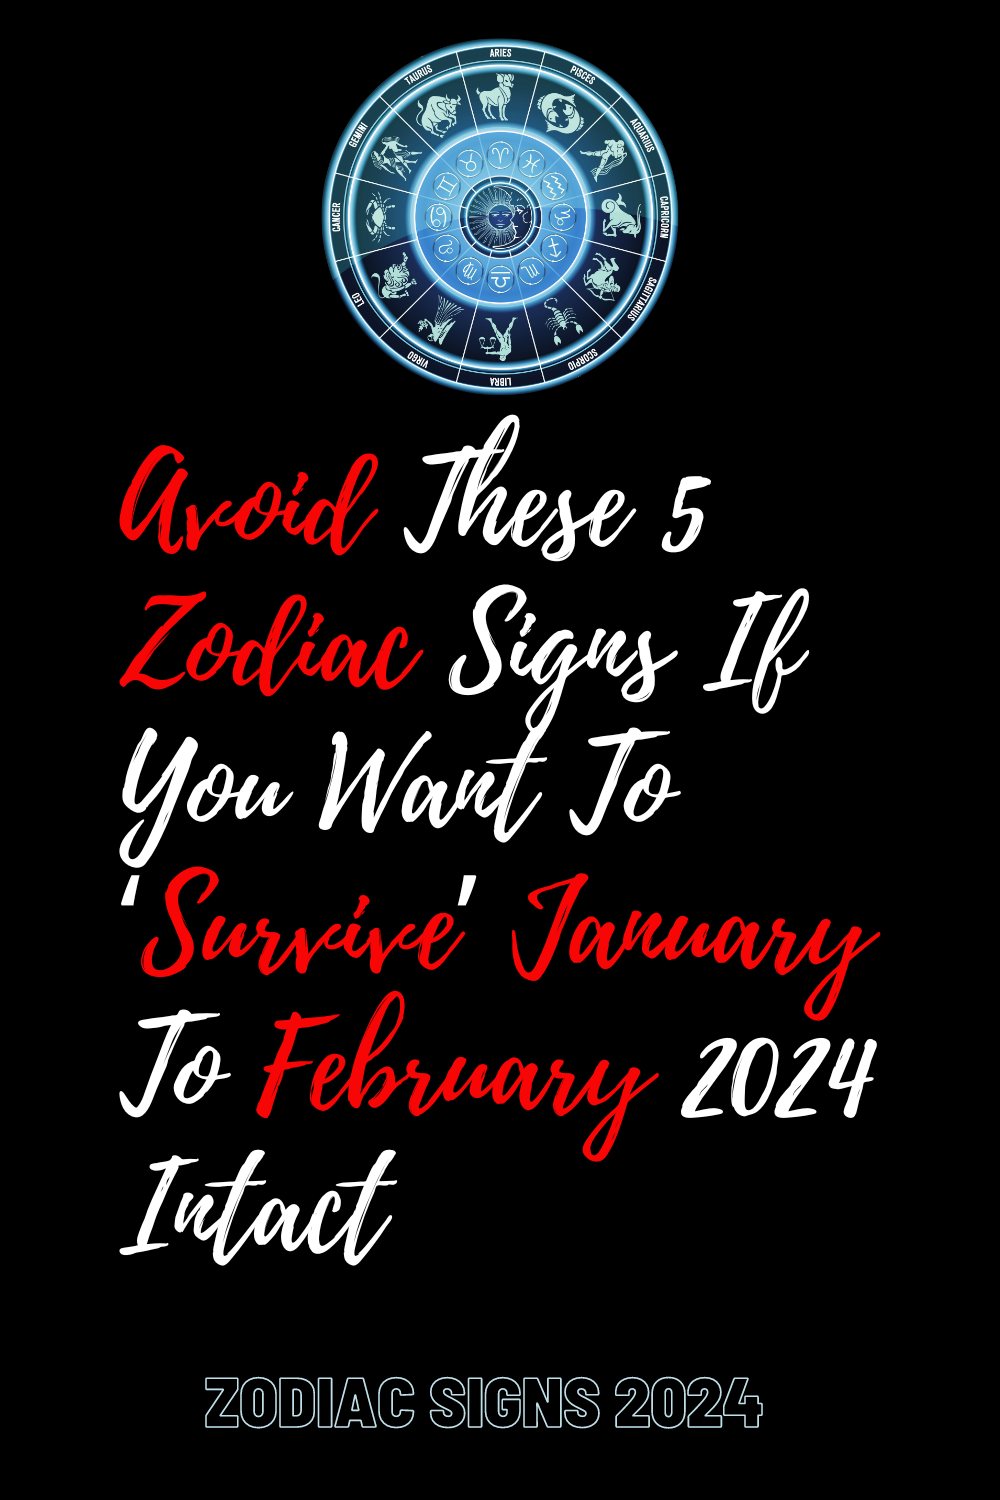 Avoid These 5 Zodiac Signs If You Want To ‘Survive’ January To February 2024 Intact